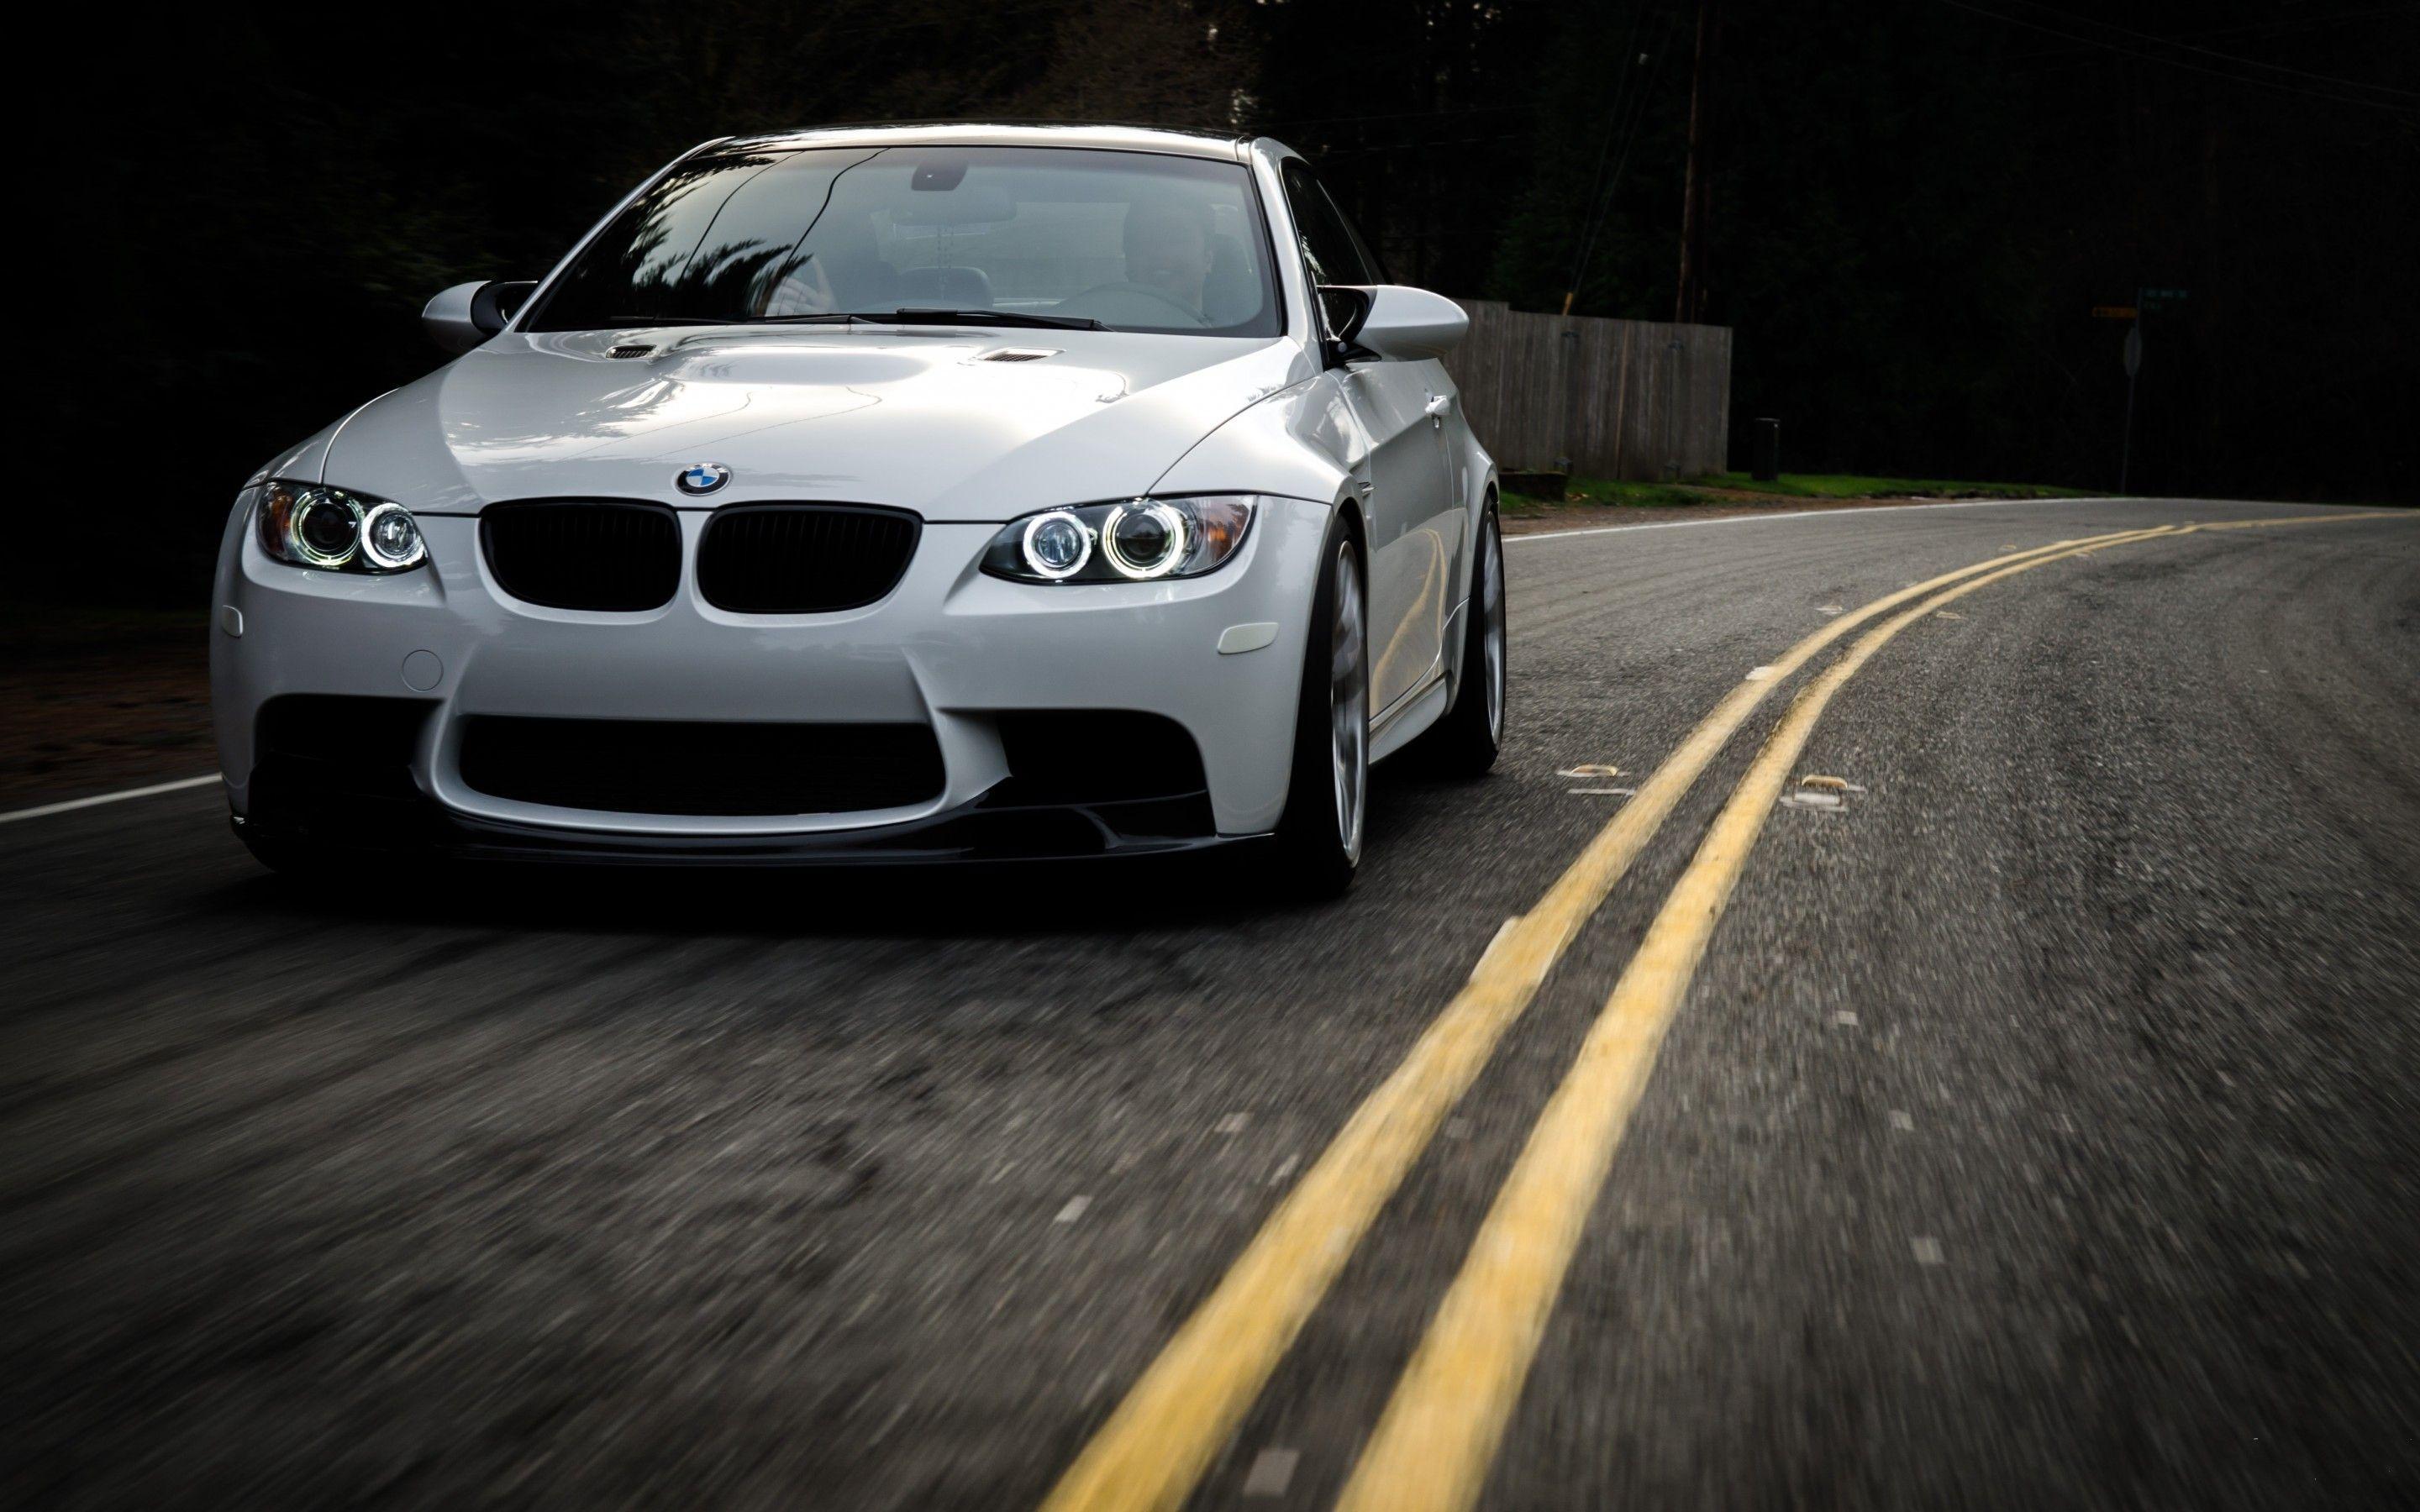 HD wallpaper BMW E92 M3 red car front view  Wallpaper Flare